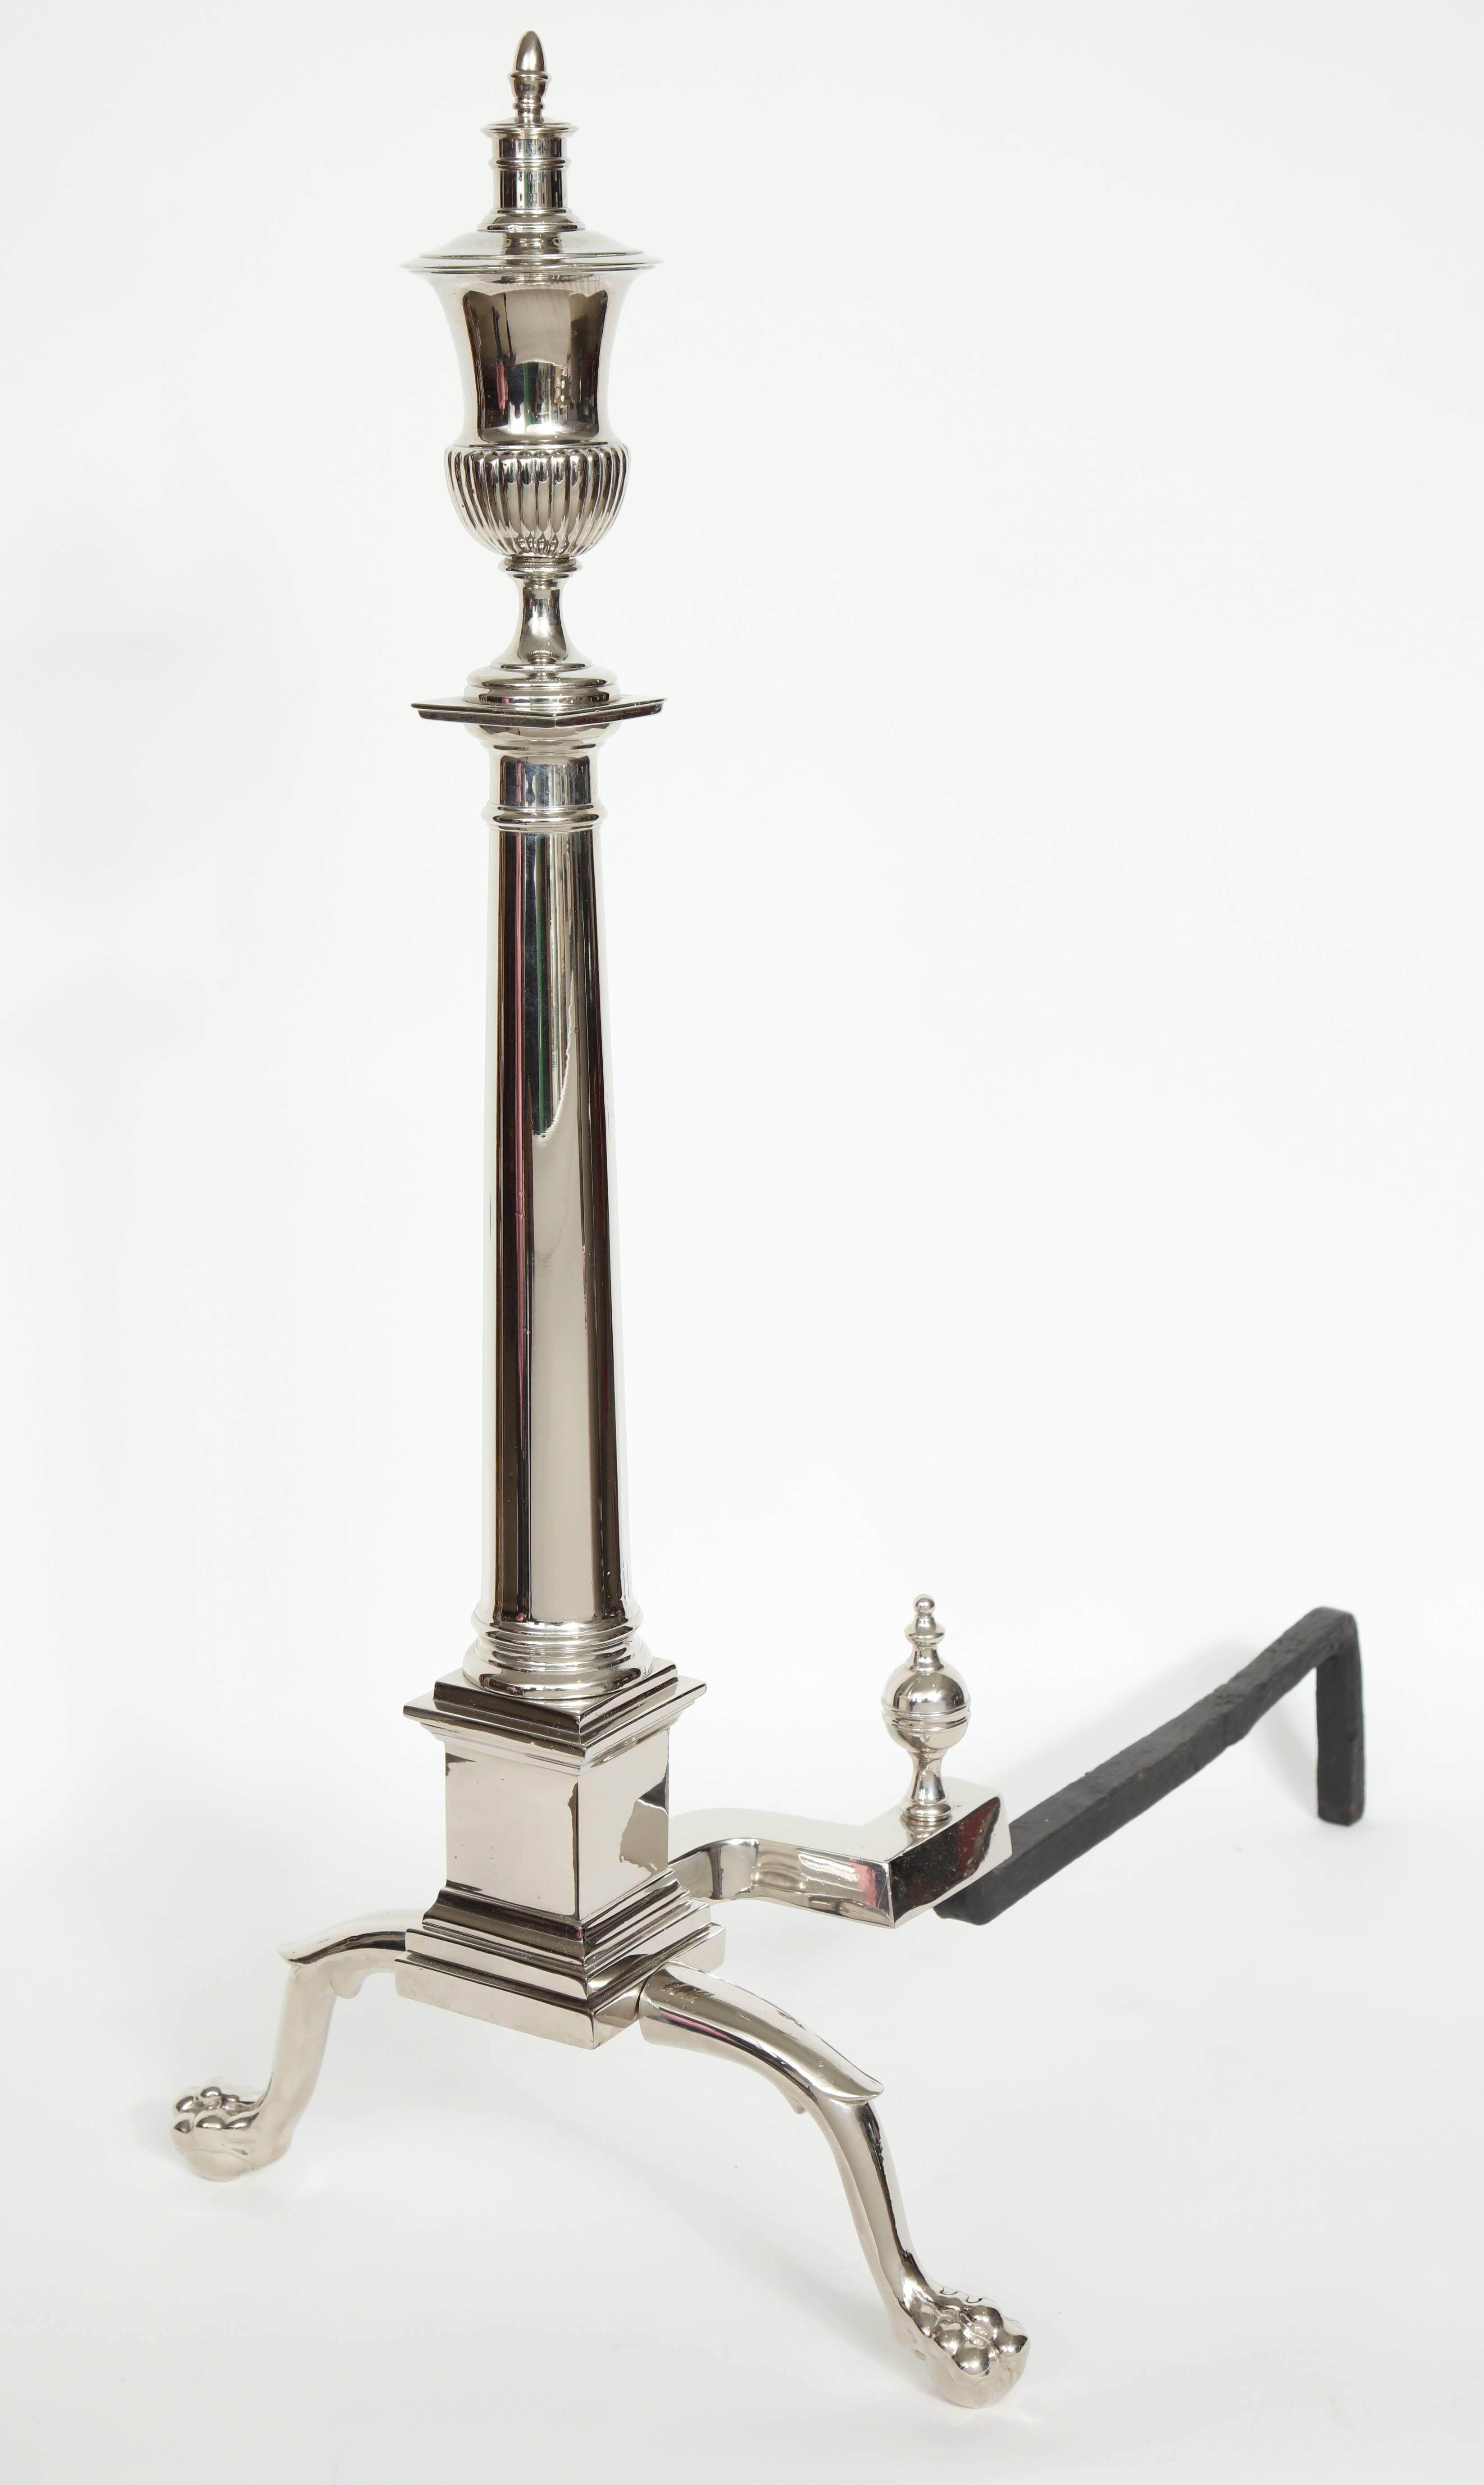 Pair of large-scale polished nickel andirons with a tapering column and a fluted urn finial resting on stylized paw feet.